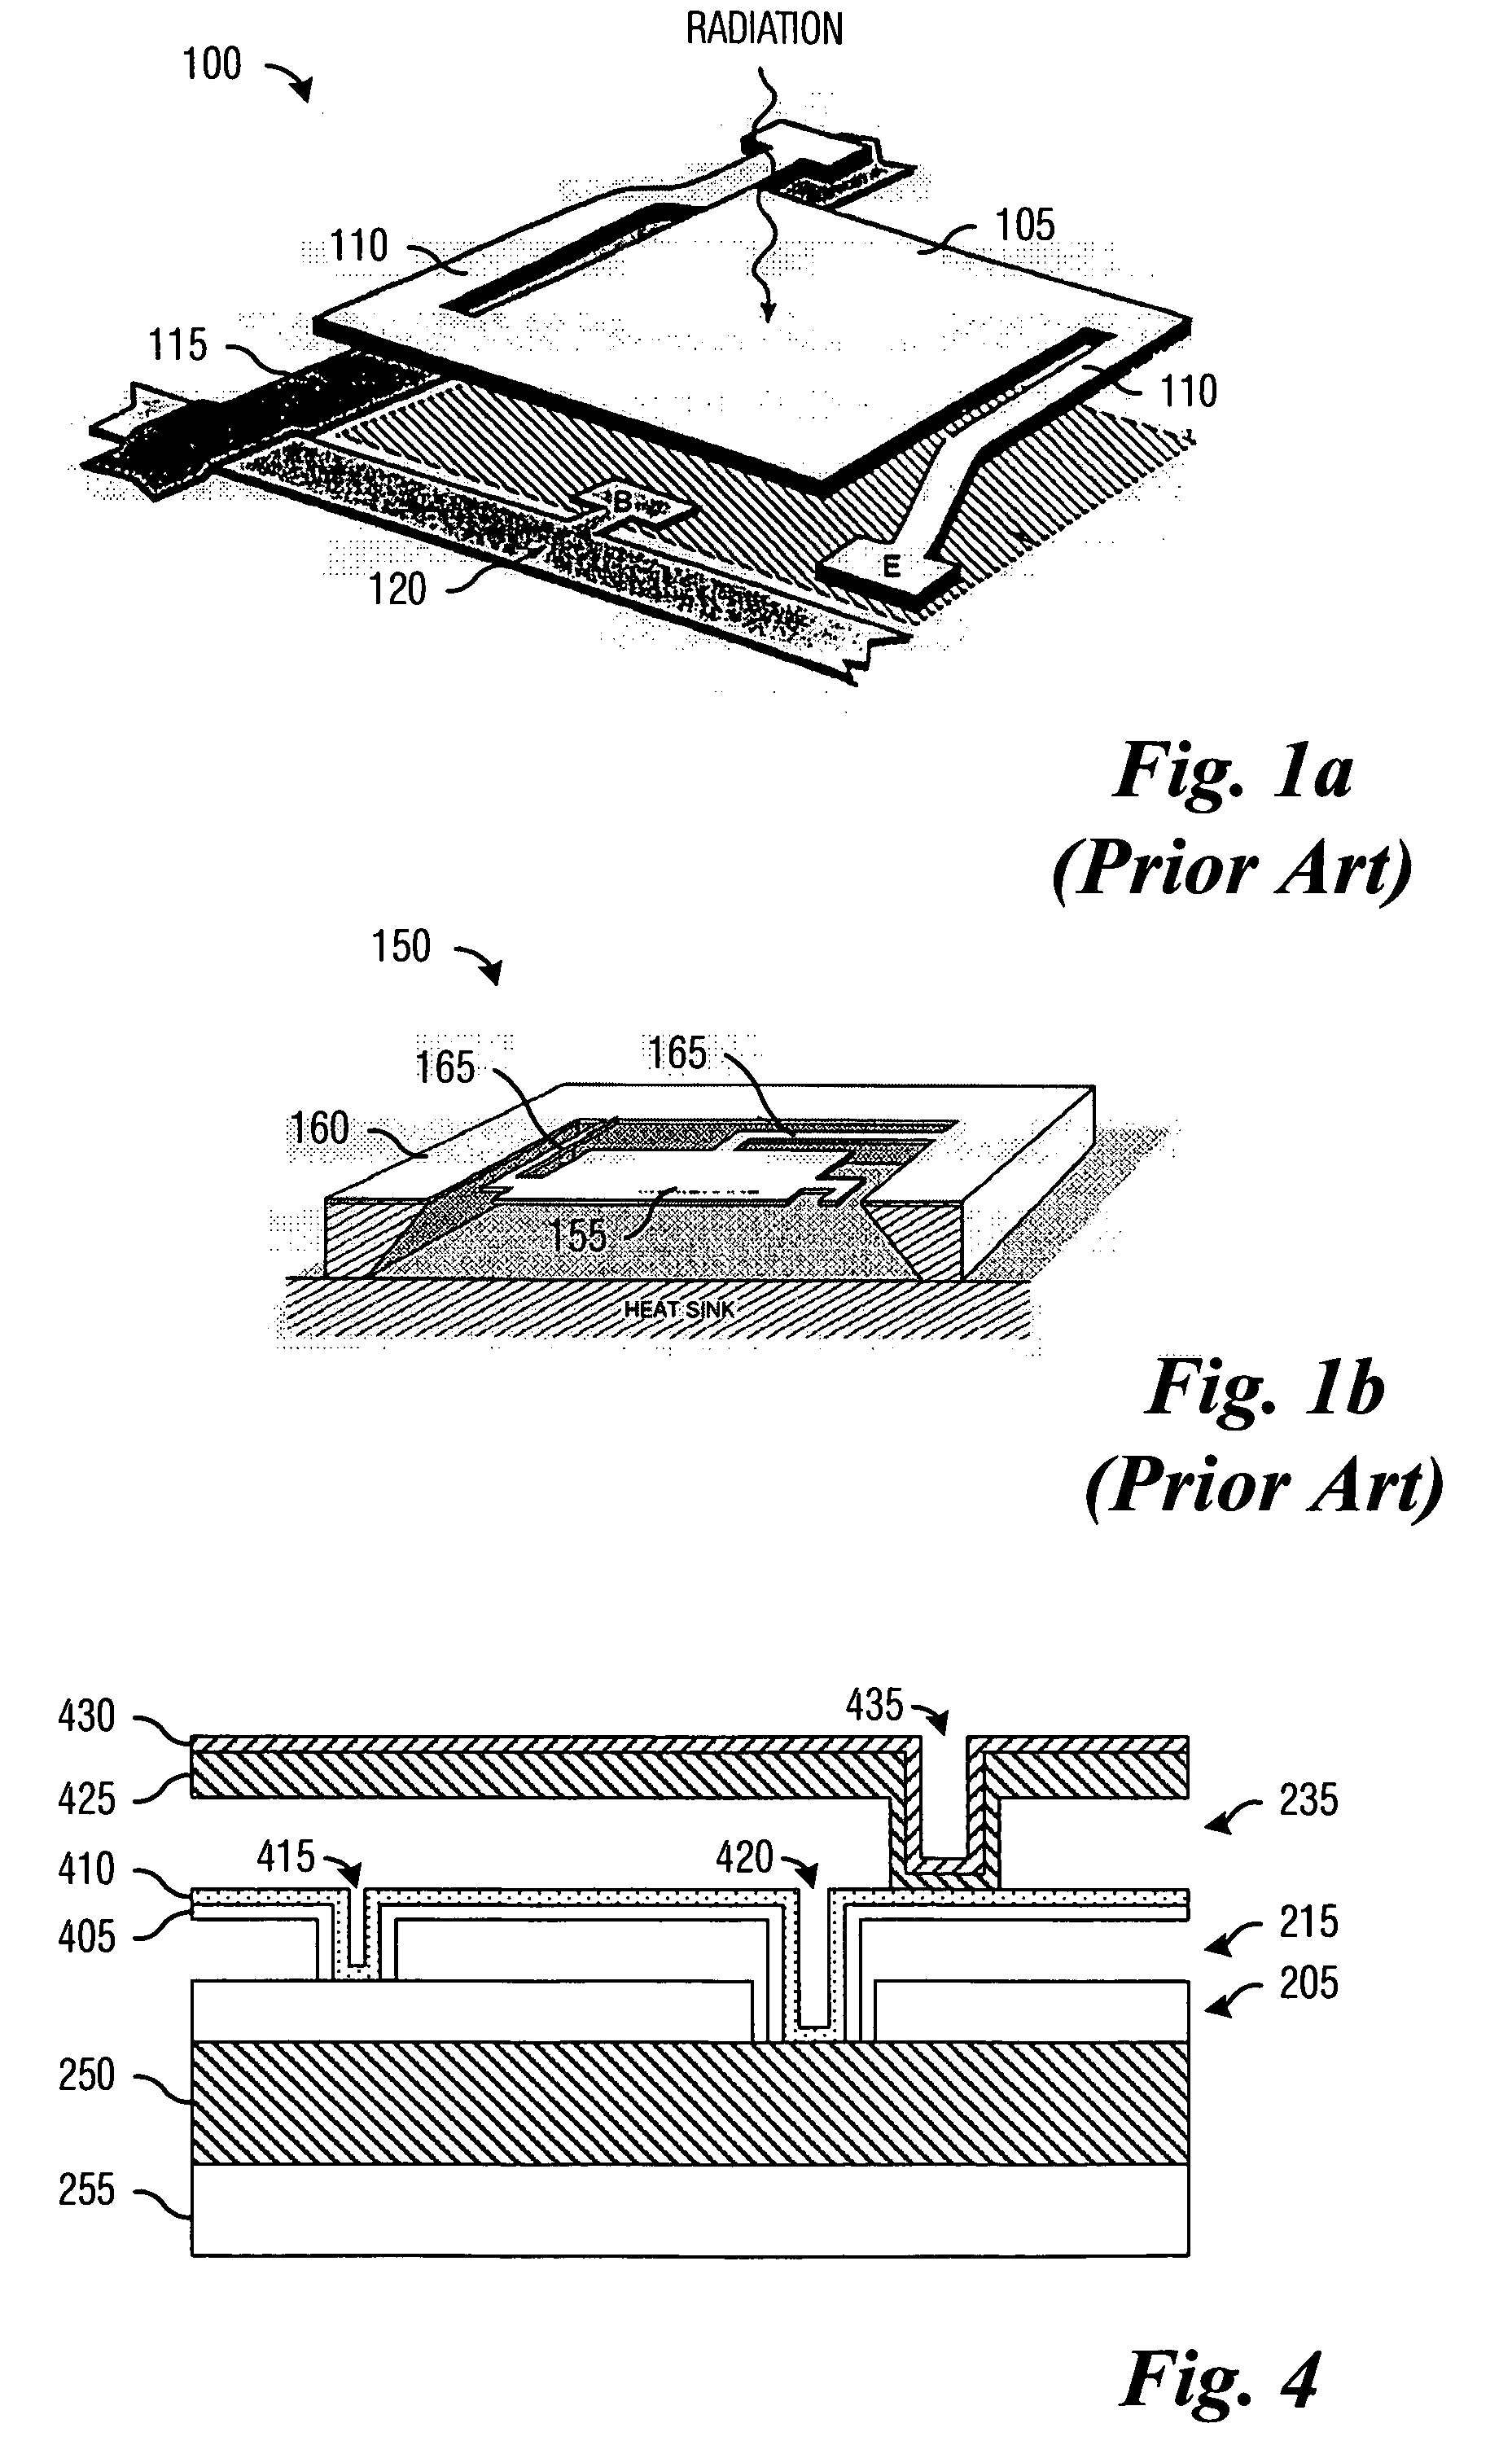 System and method for radiation detection and imaging